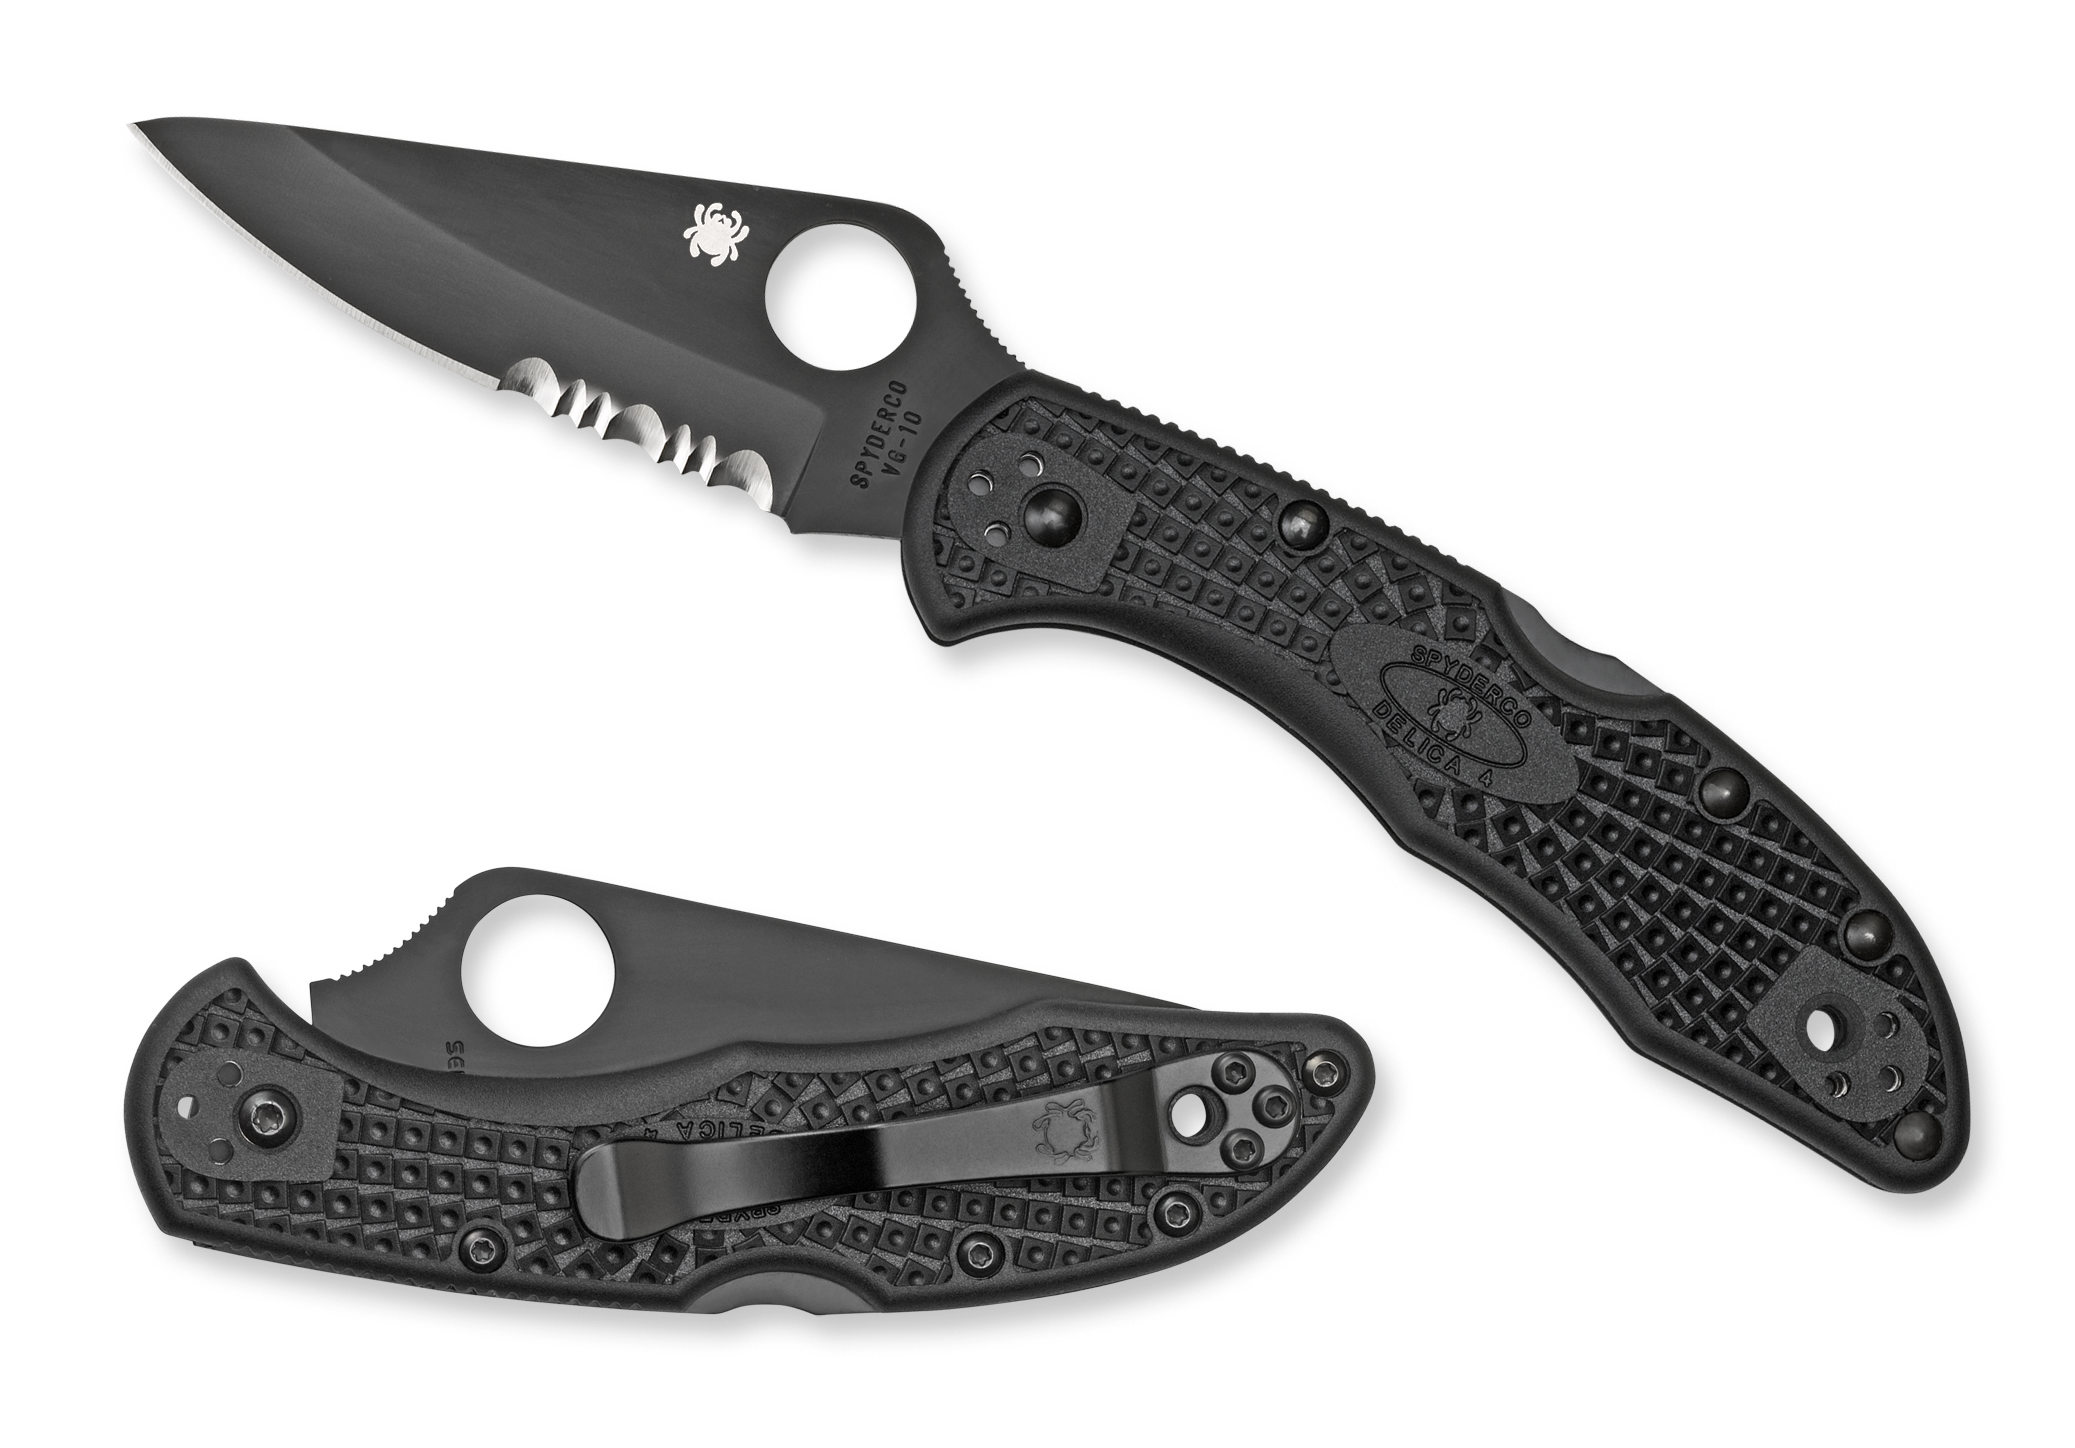 Spyderco Delica 4 - Flat Ground - Partially Serrated - C11PSBBK